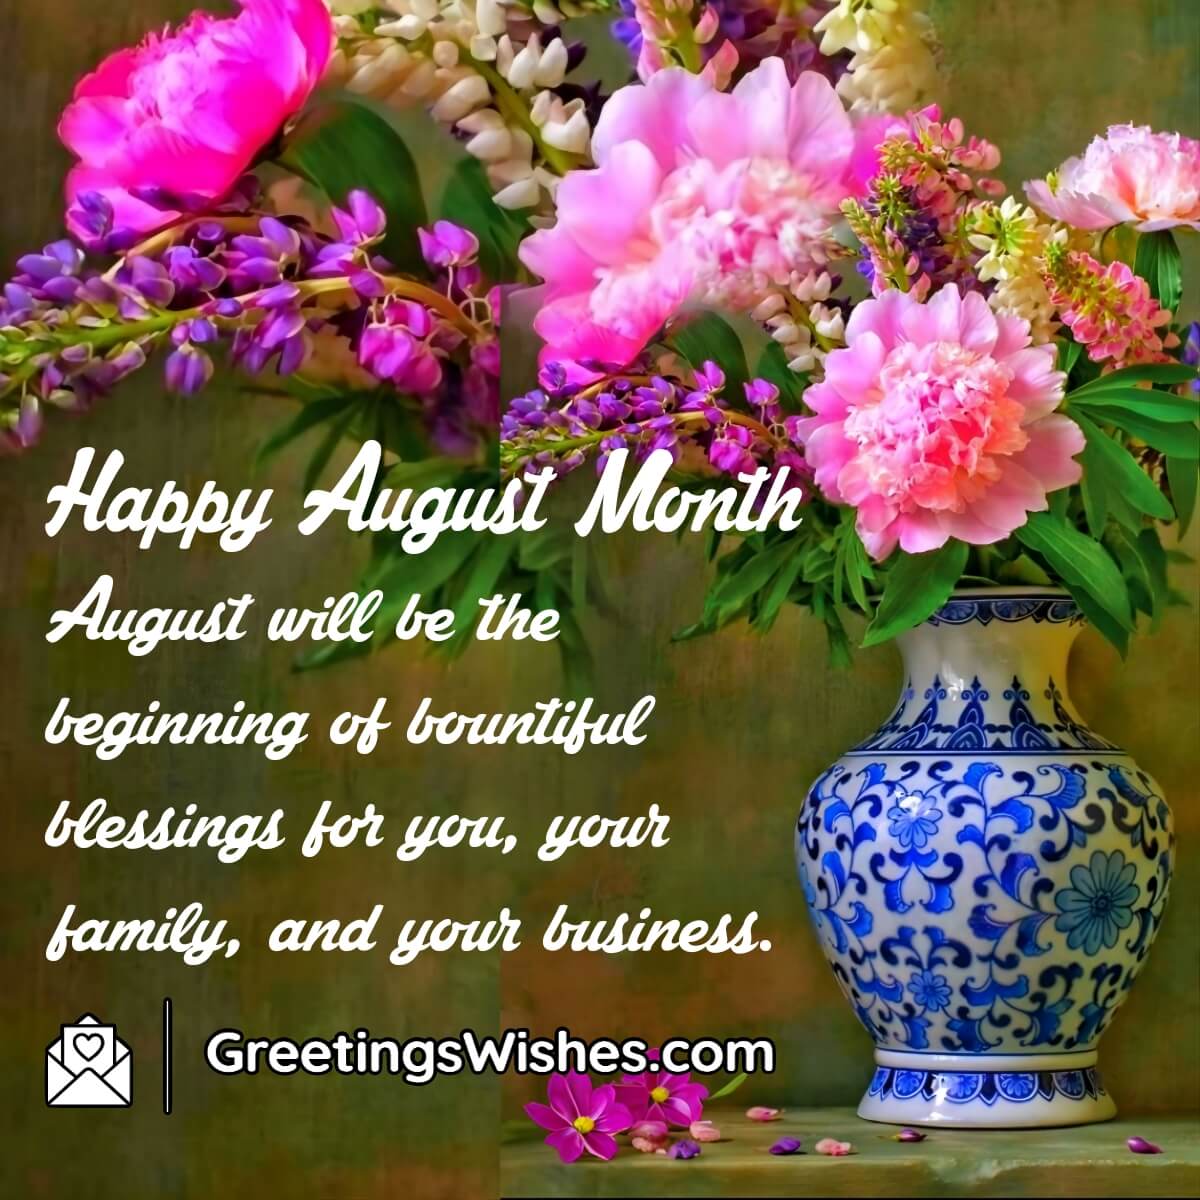 Happy August Month Wishes